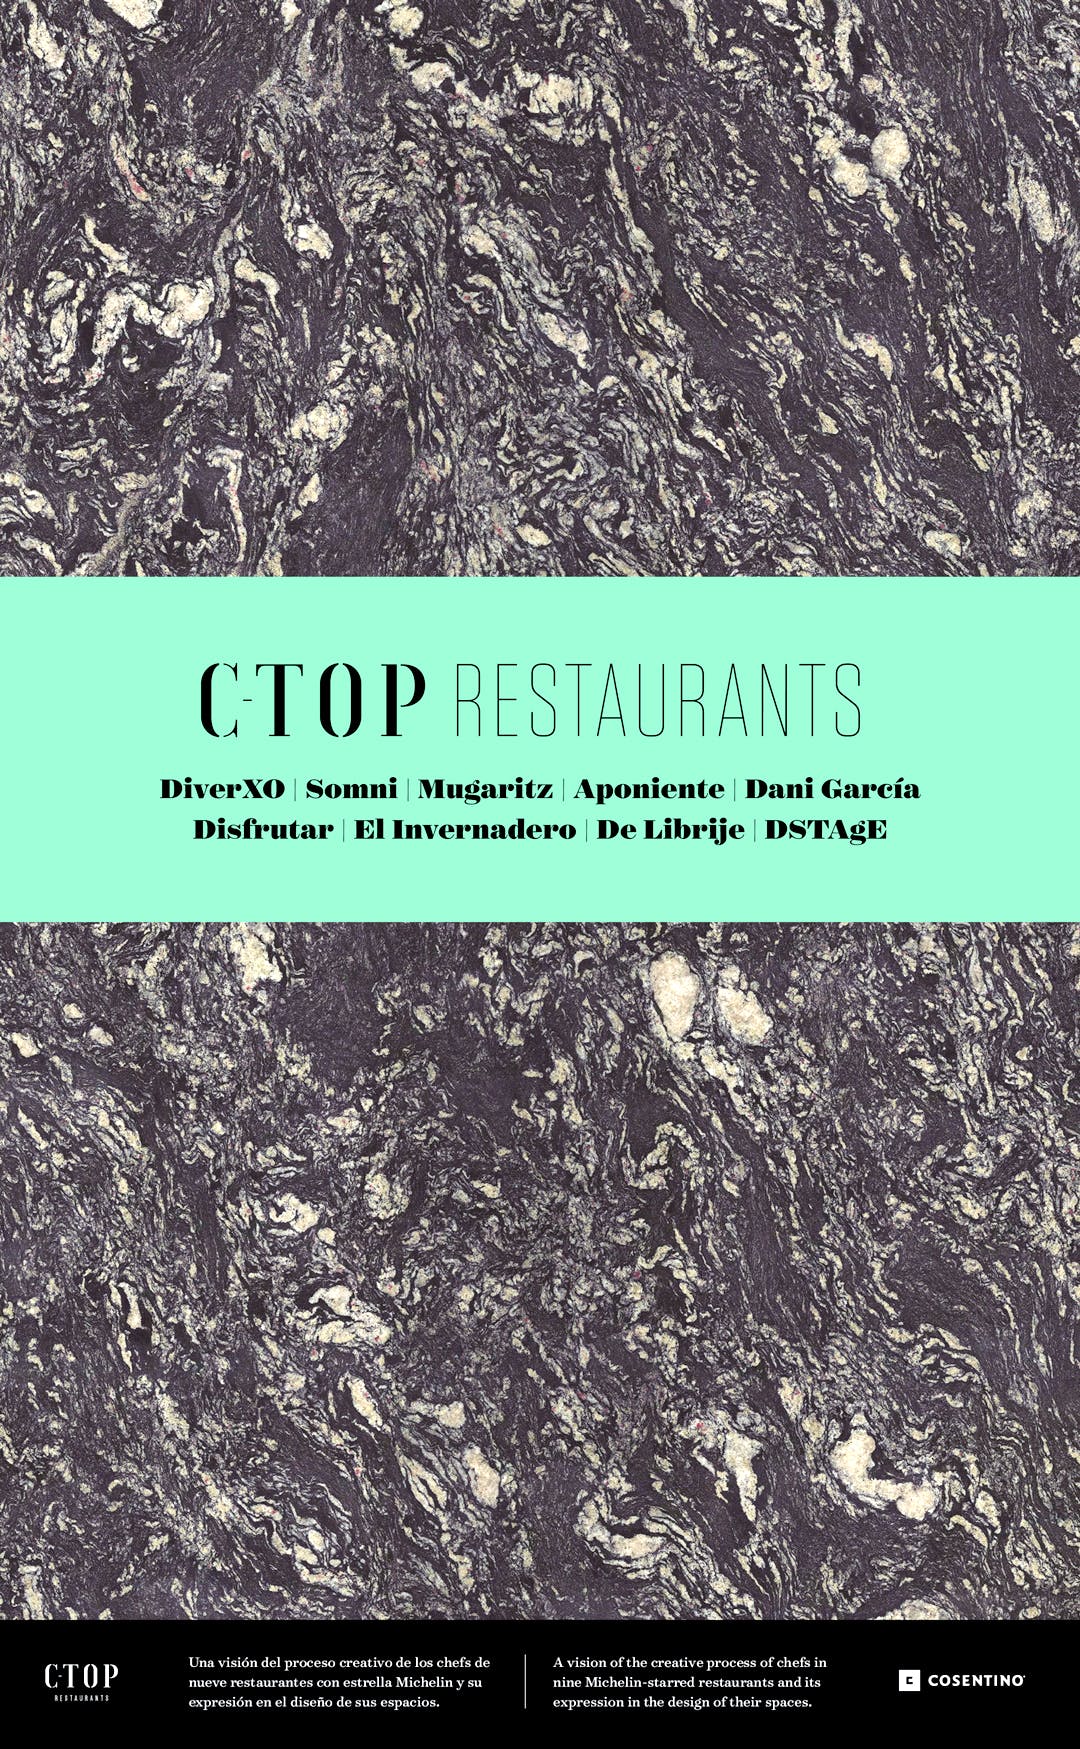 Image of ctop portada 1 in Stevie Awards for "C-Top Restaurants" - Cosentino